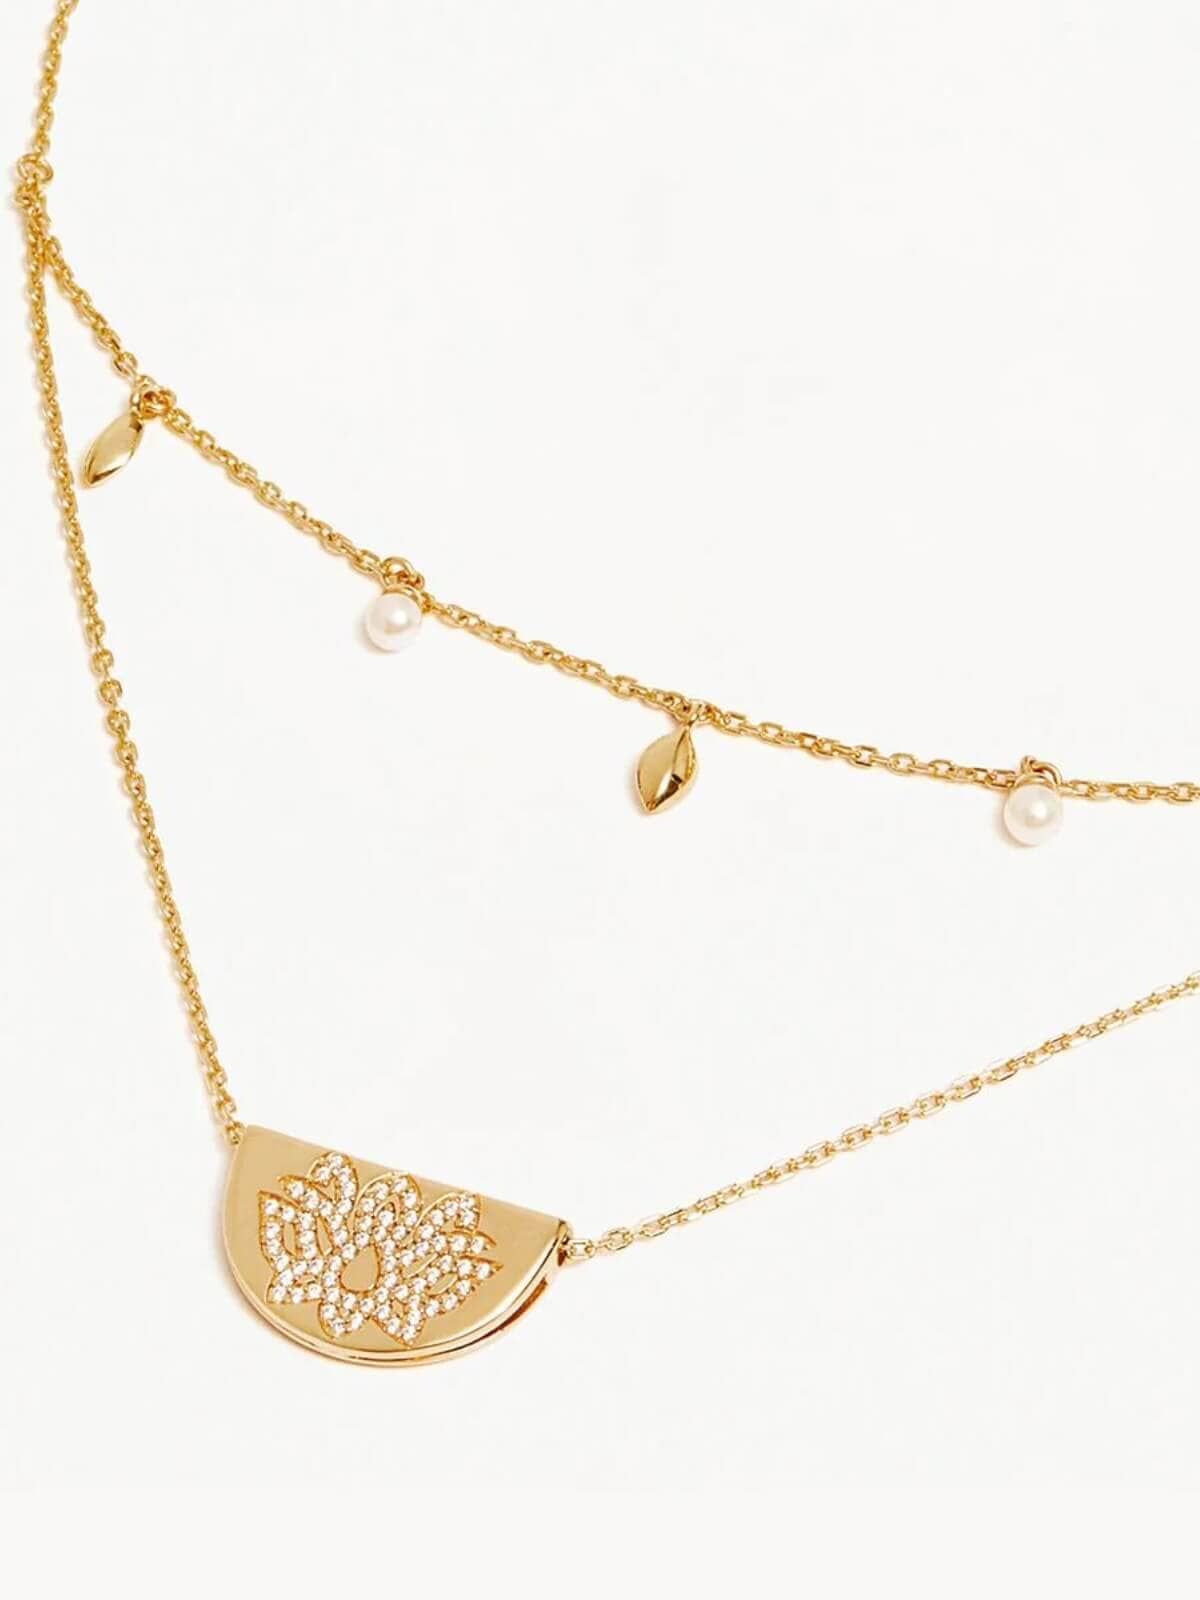 By Charlotte | Live In Peace Lotus Necklace - Gold | Perlu